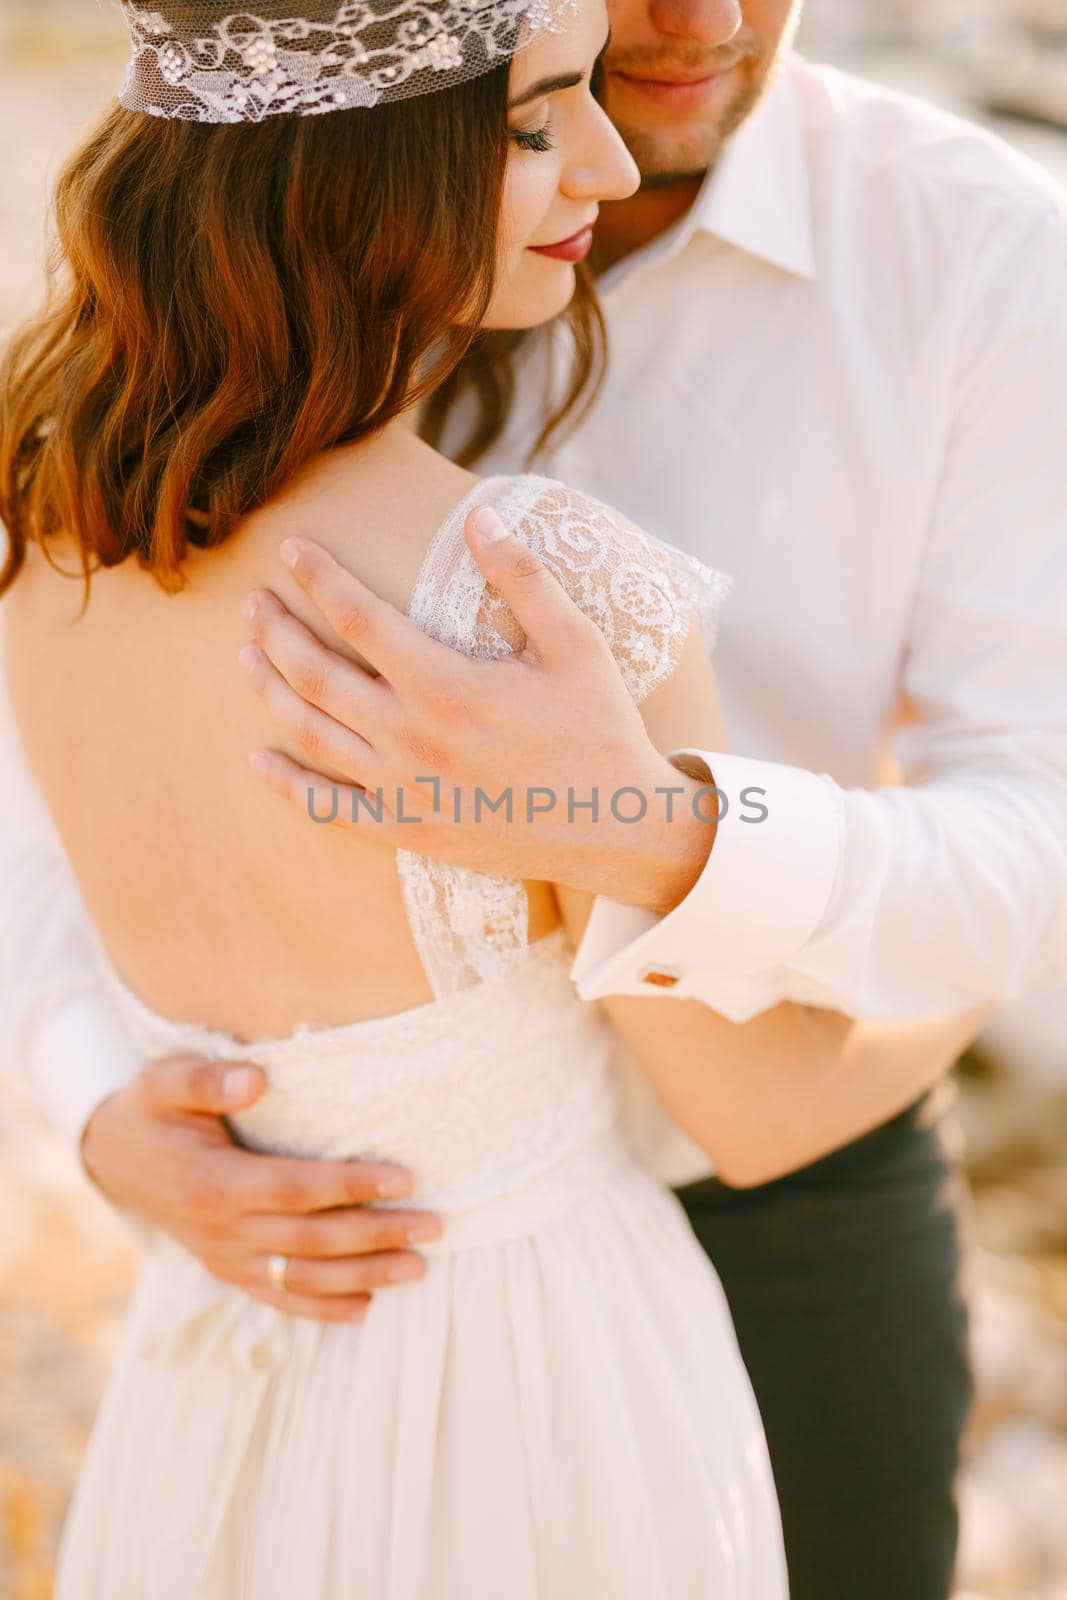 The bride and groom tenderly hug , the groom put his hands on the back of the bride . High quality photo